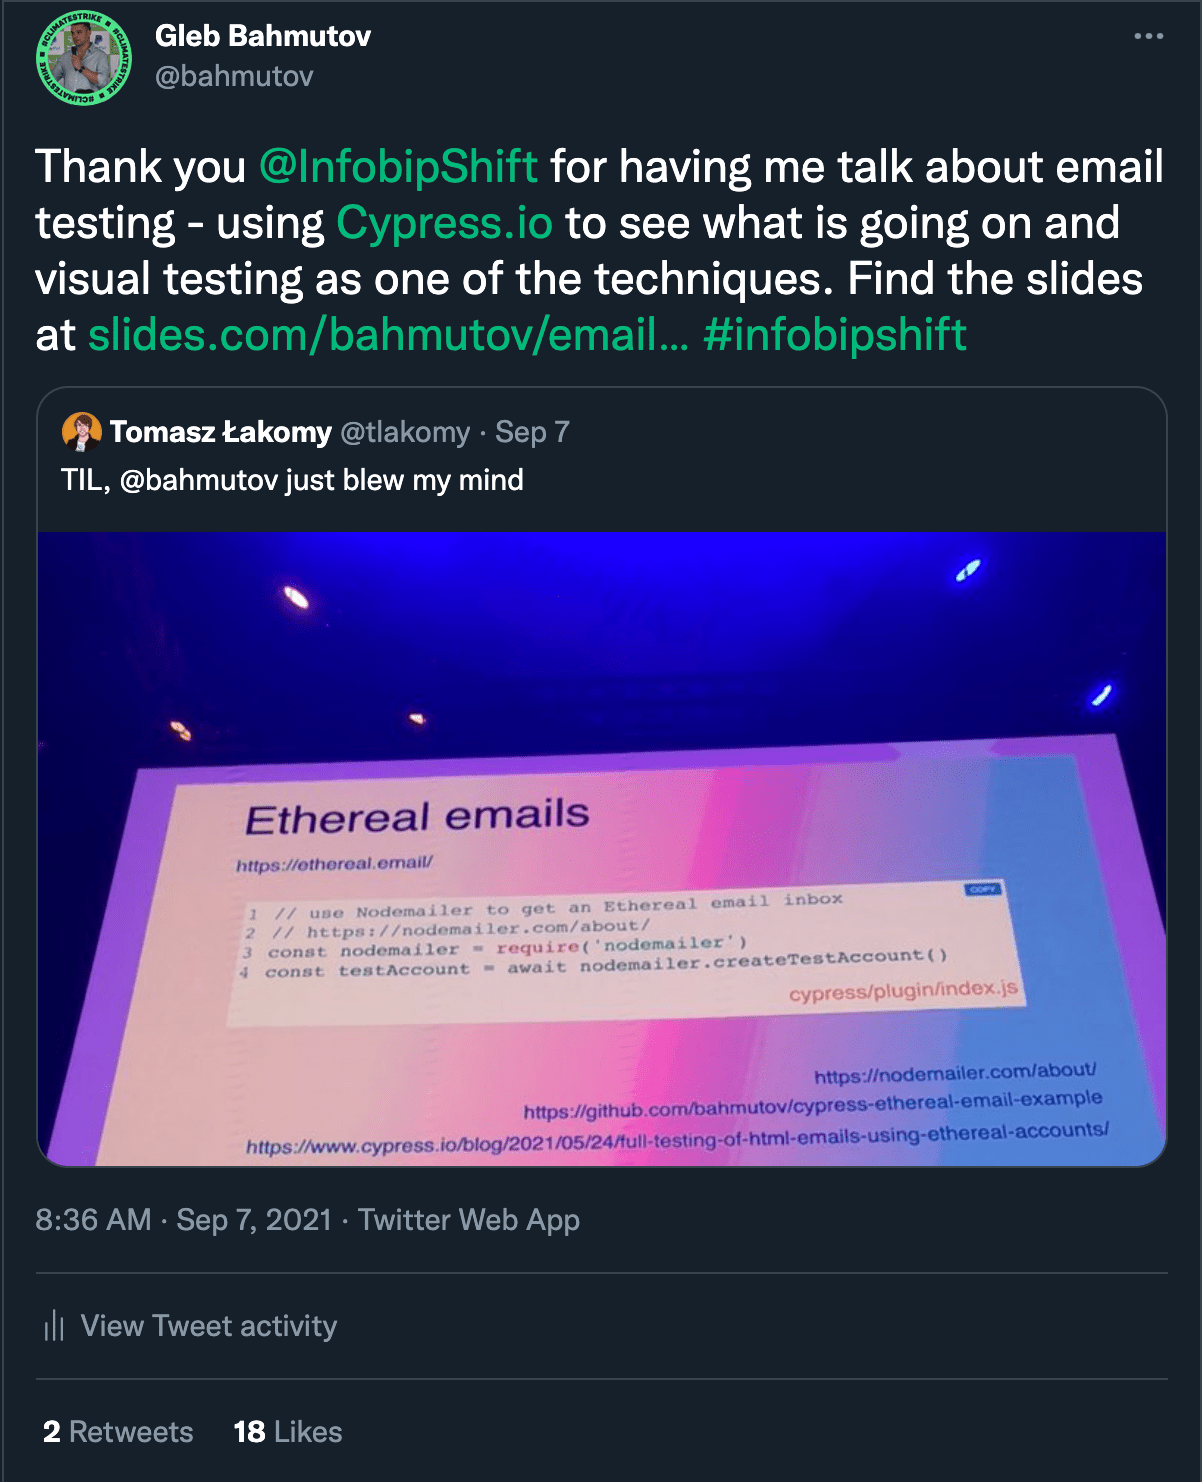 A tweet after the conference with the link to the presentation